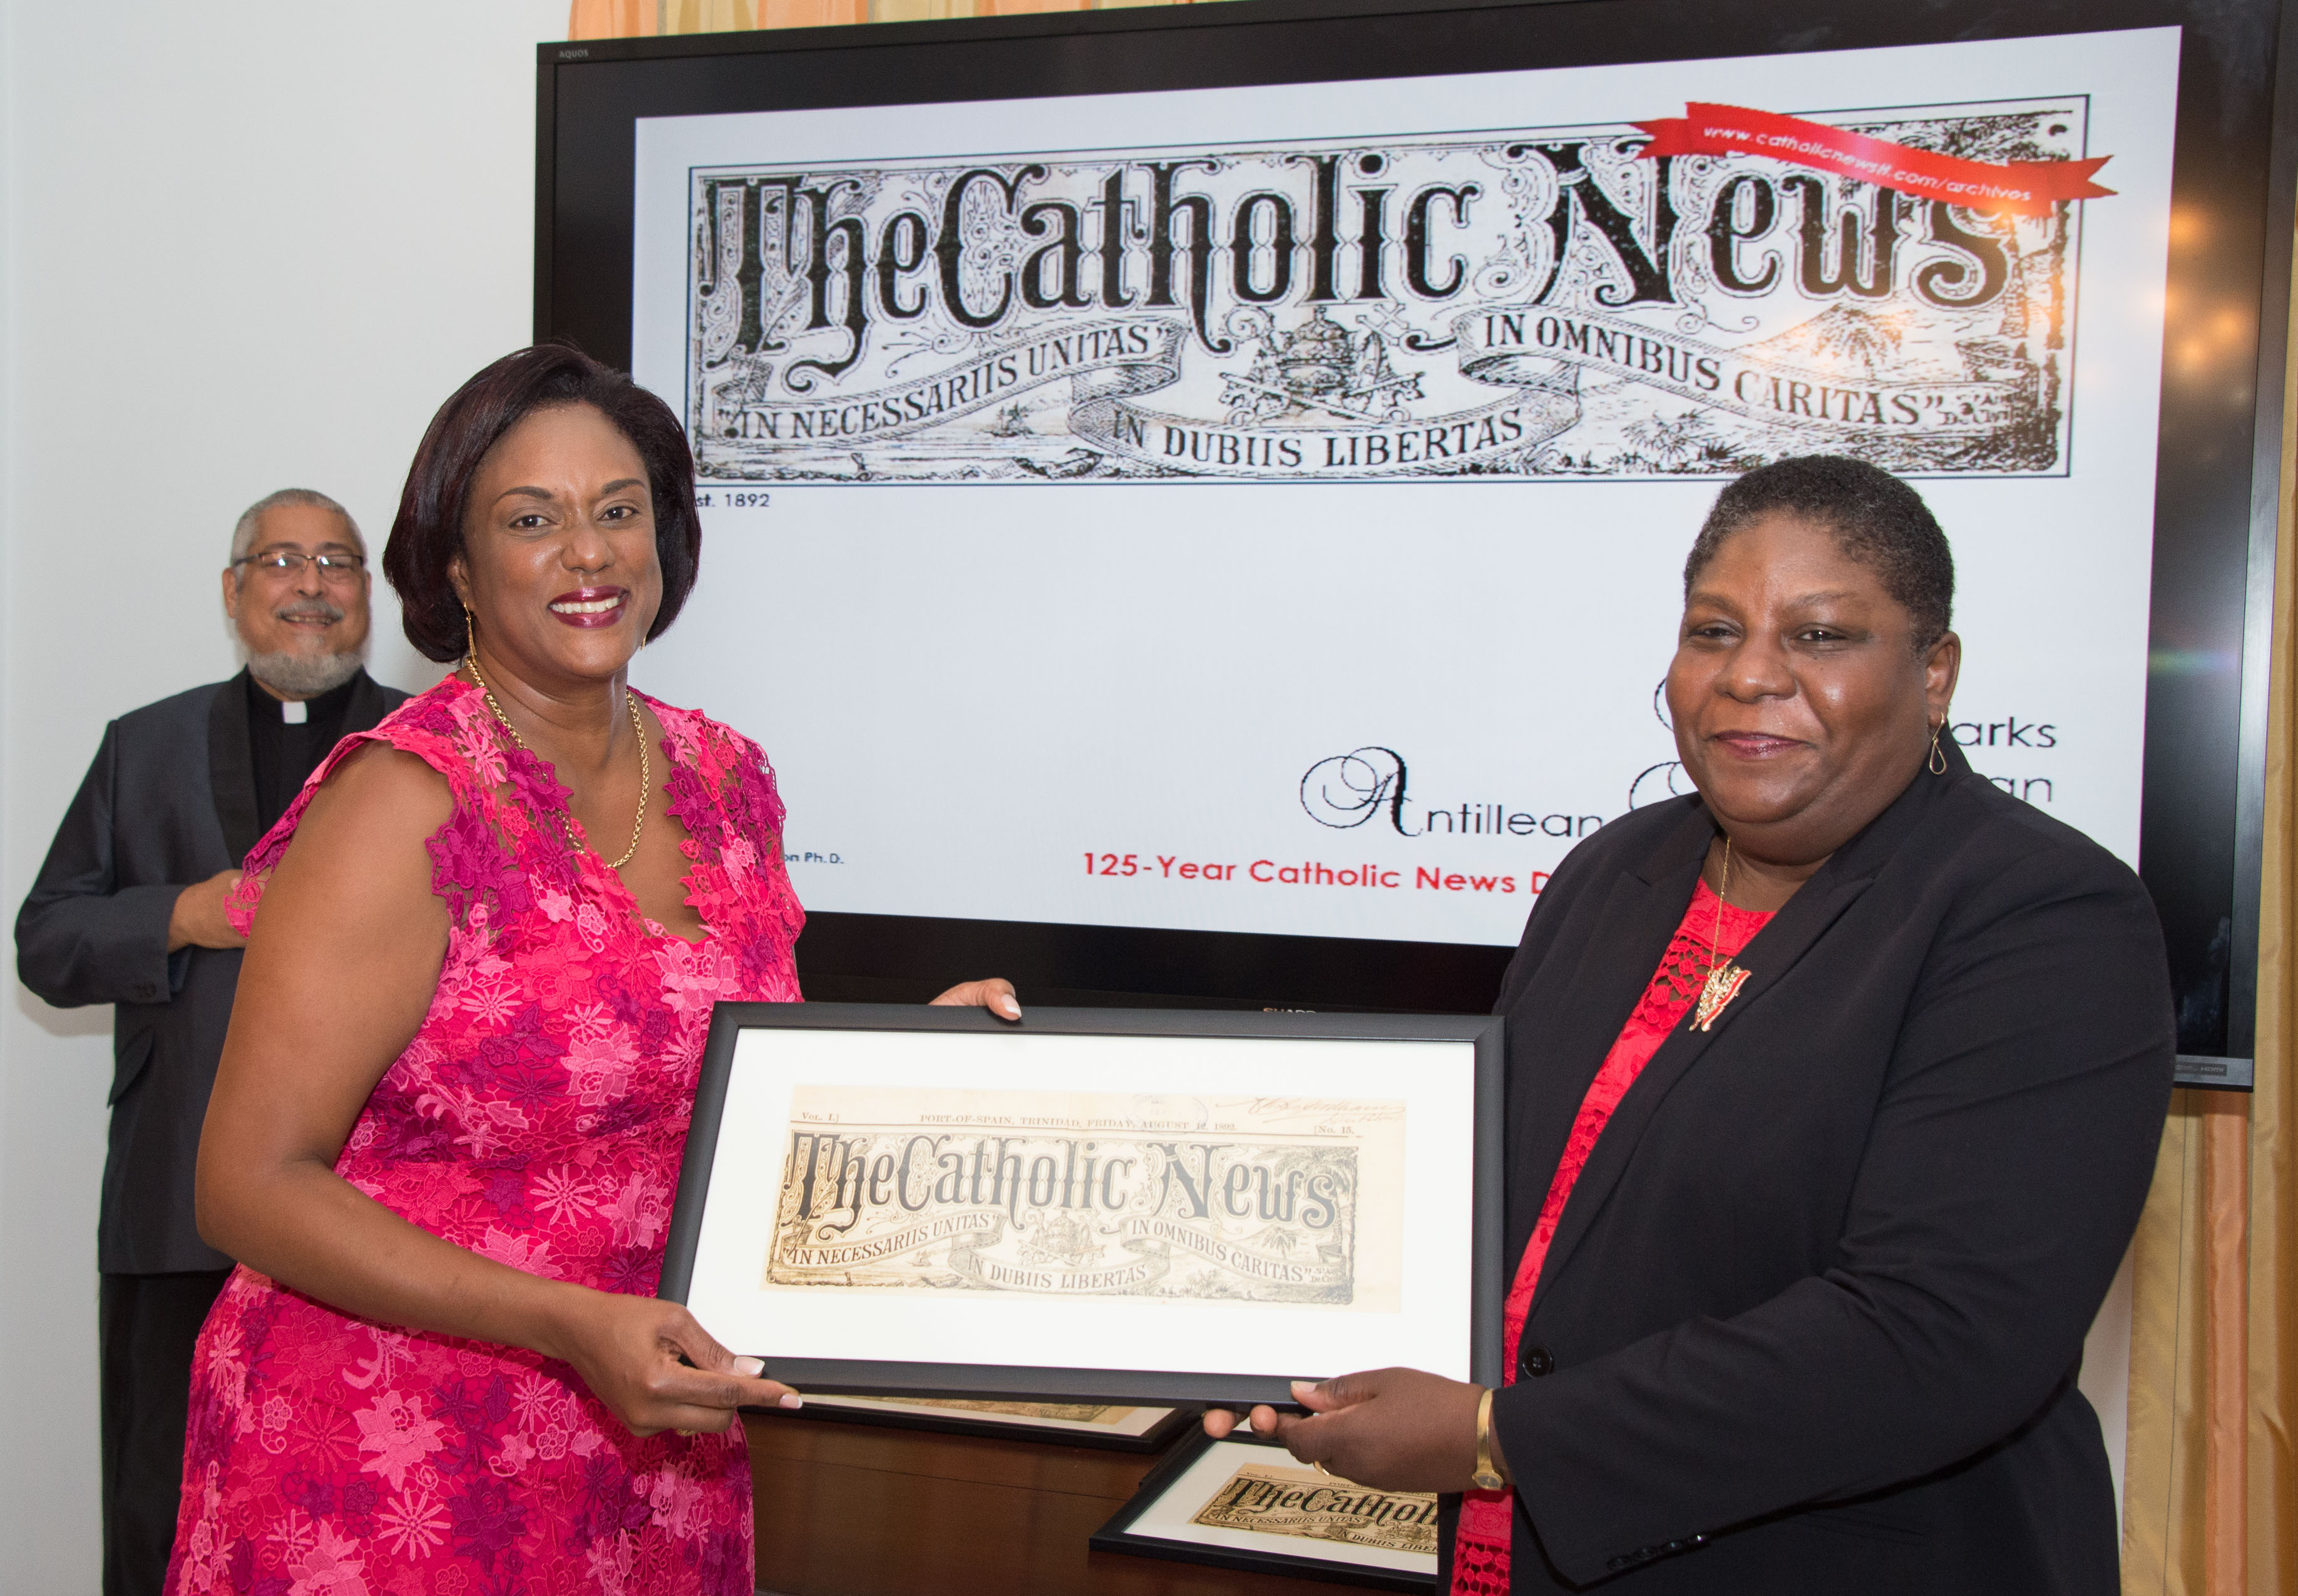 Catholic News Digital Archive launched